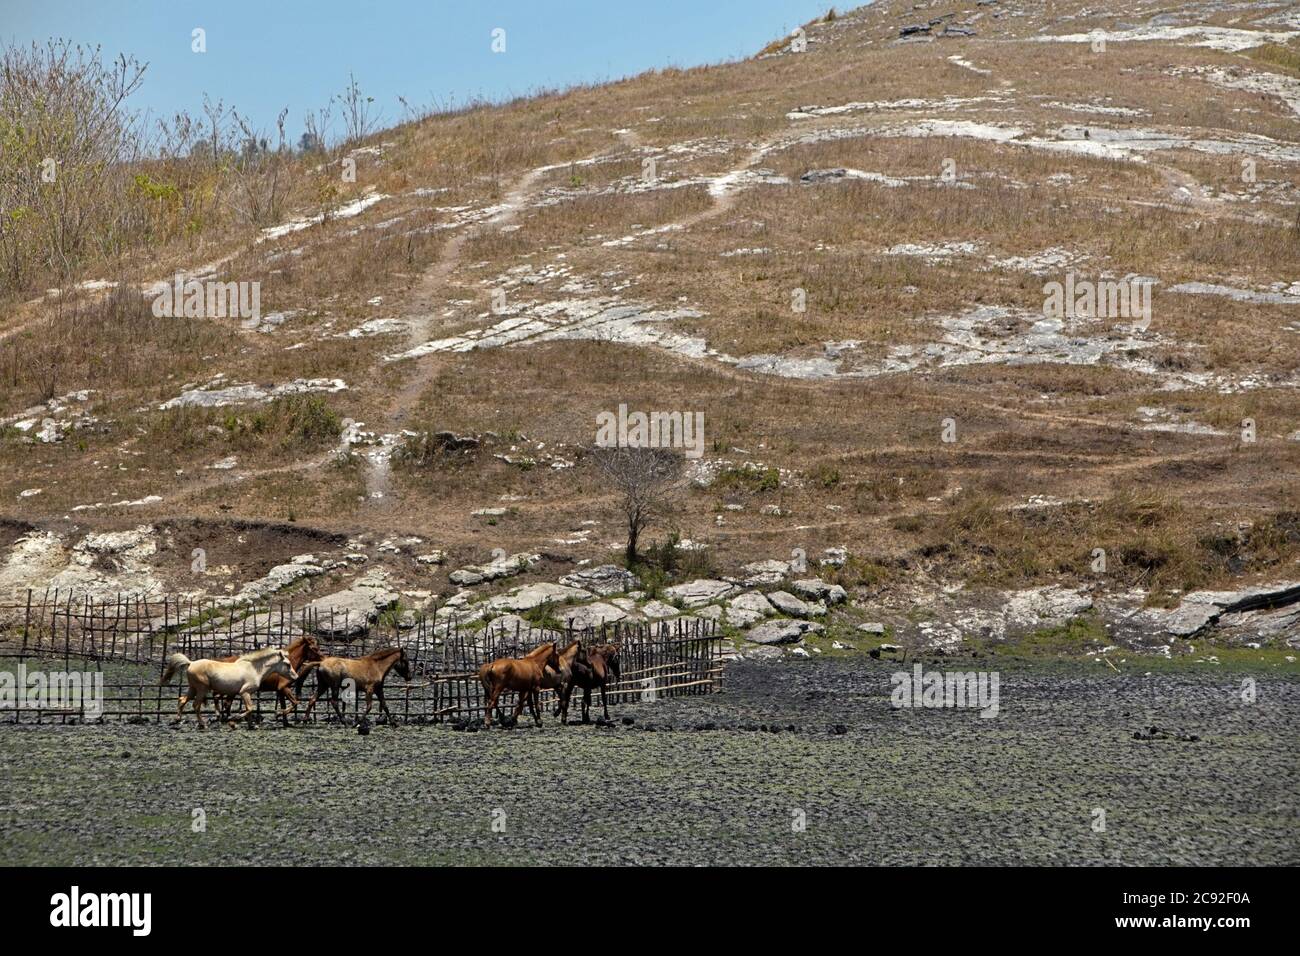 Sumba ponies at a farm on dry landscape during dry season in East Sumba, East Nusa Tenggara, Indonesia. Stock Photo